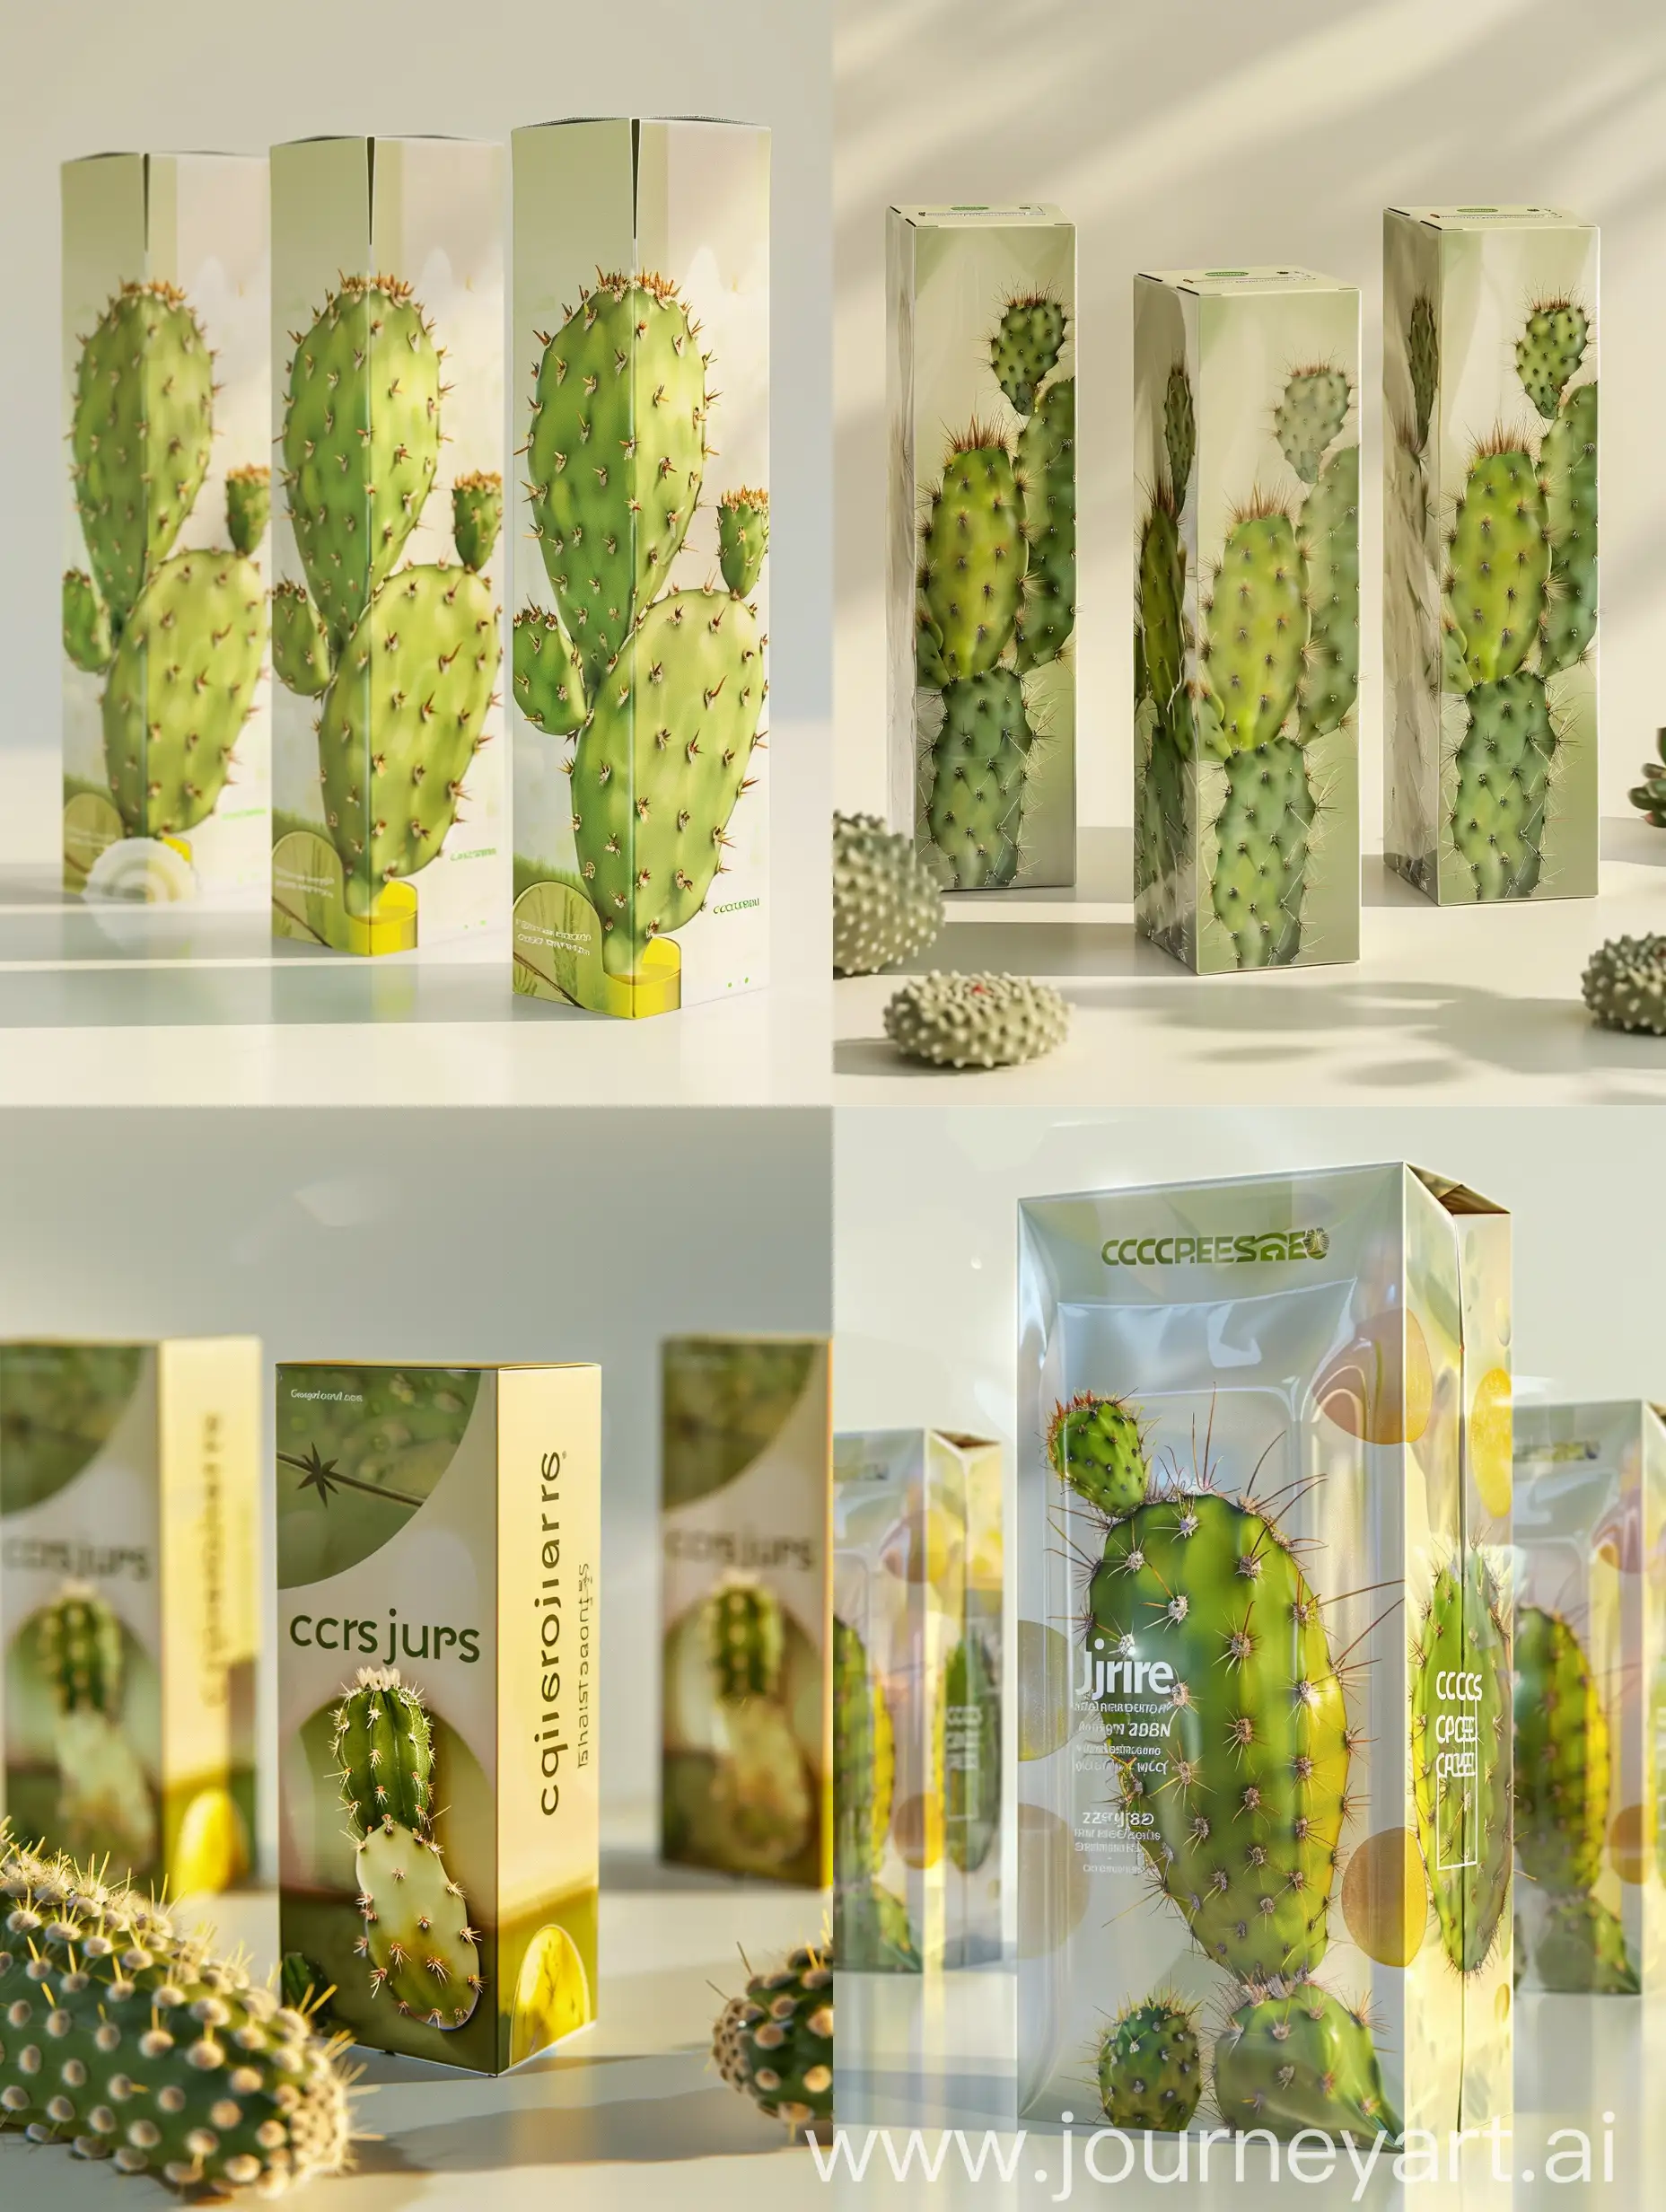 Design a modern rectangular cactus juice package and depict it as a three-dimensional 3d model dedicated to cactus juice, emphasize its rich nutritional value and strong prickliness, use a light, simple, uncomplicated background, emphasizing the beauty of cactus juice packaging. The packaging should be in glossy rectangular boxes of the Tetrapak system, designed to ensure image clarity and reliable storage of cactus juice, for ease of use, the design should be simple and functional, taken in natural light, emphasize its professional and attractive appearance, as well as emphasize the freshness and health benefits of cactus juice juice. In the design, use a light green and yellow palette using neutral and white colors. Present the packaging from several sides. The image must be highly accurate and highly detailed, displaying all the small details, with high accuracy and clear focus.